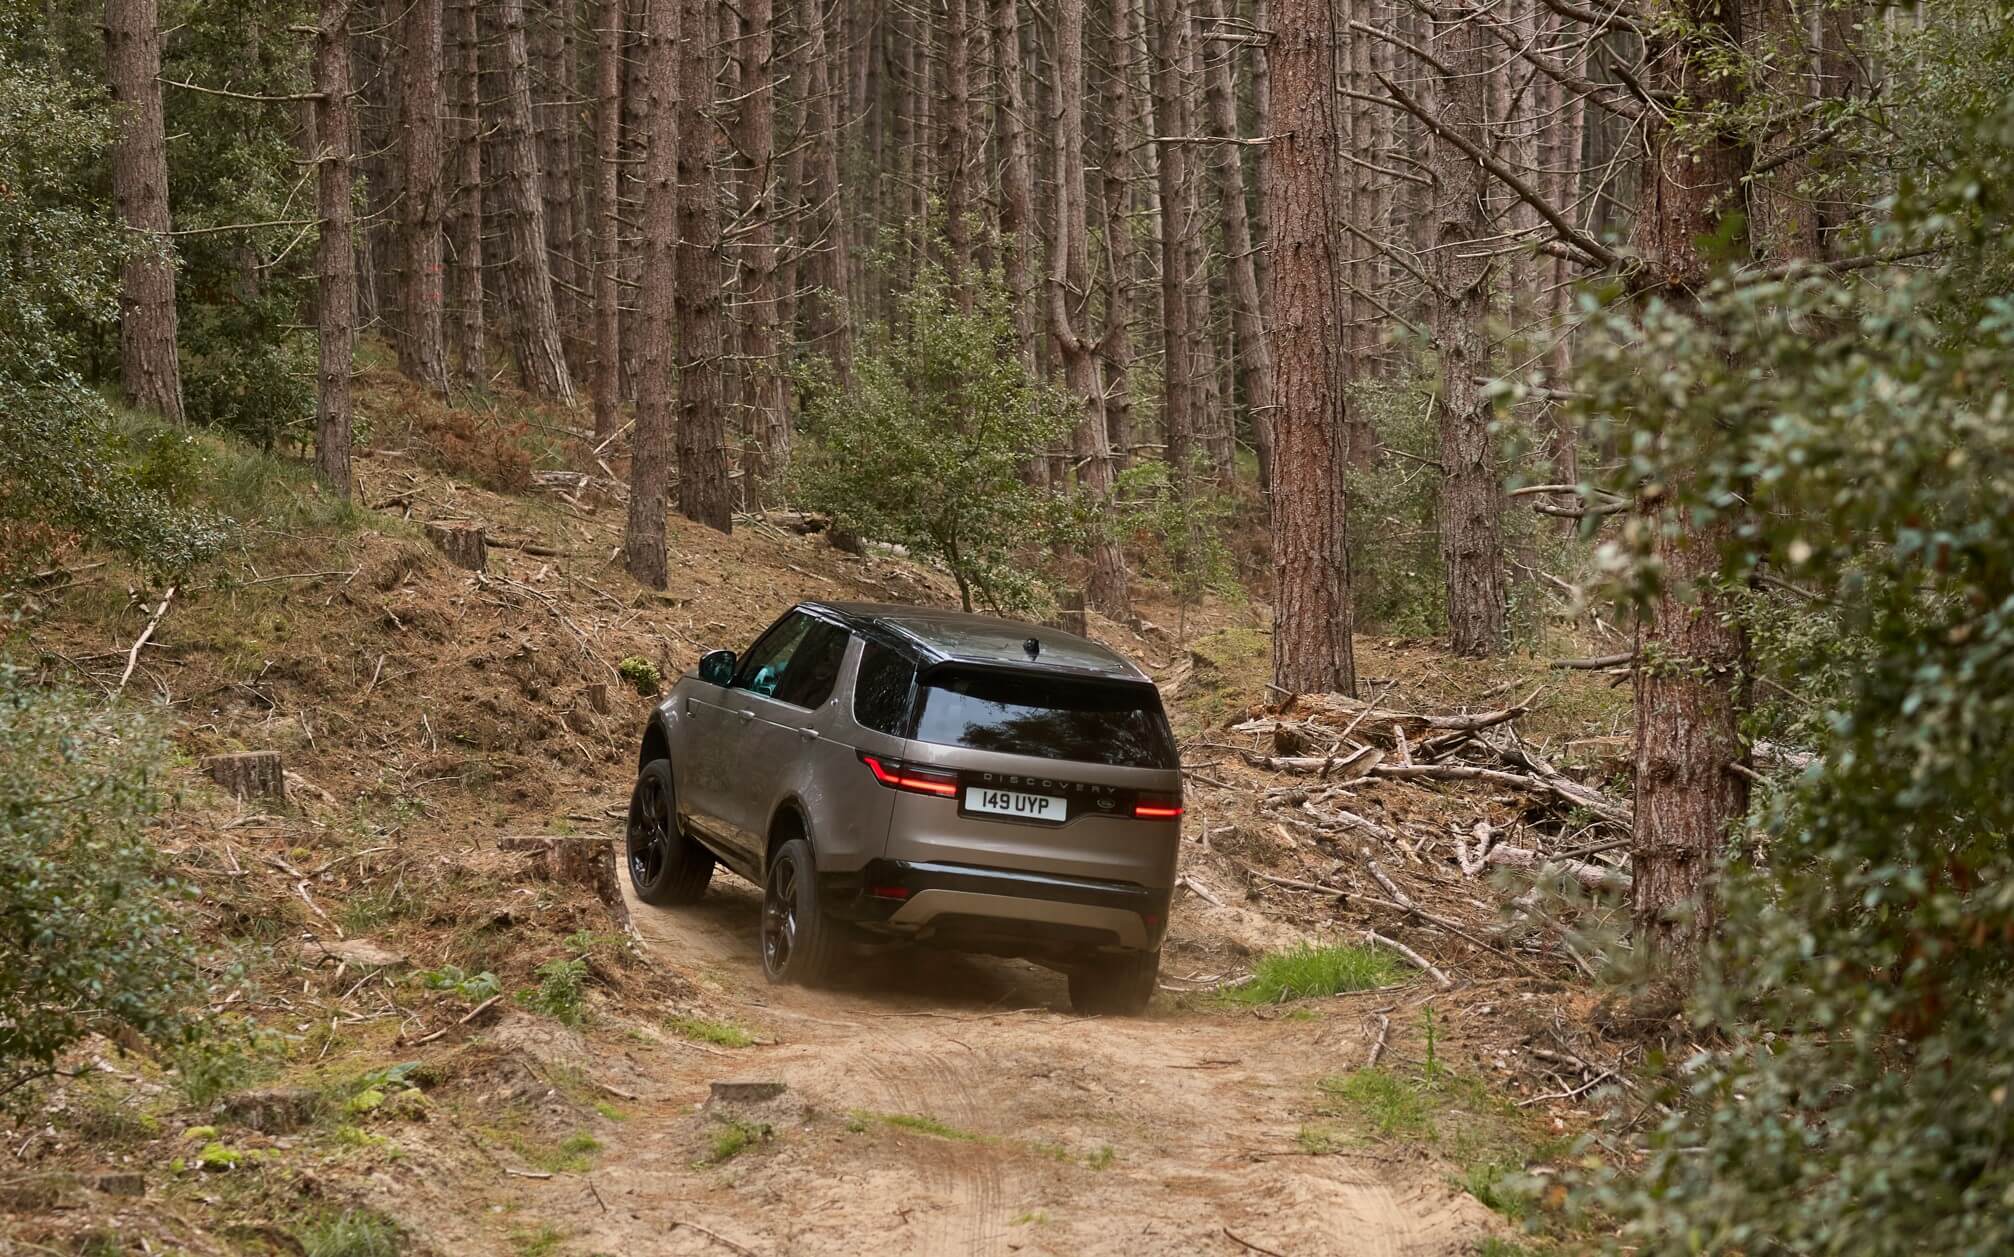 Tegenstander zonsopkomst gisteren Will the Land Rover Discovery return to glory? - Automotive Daily